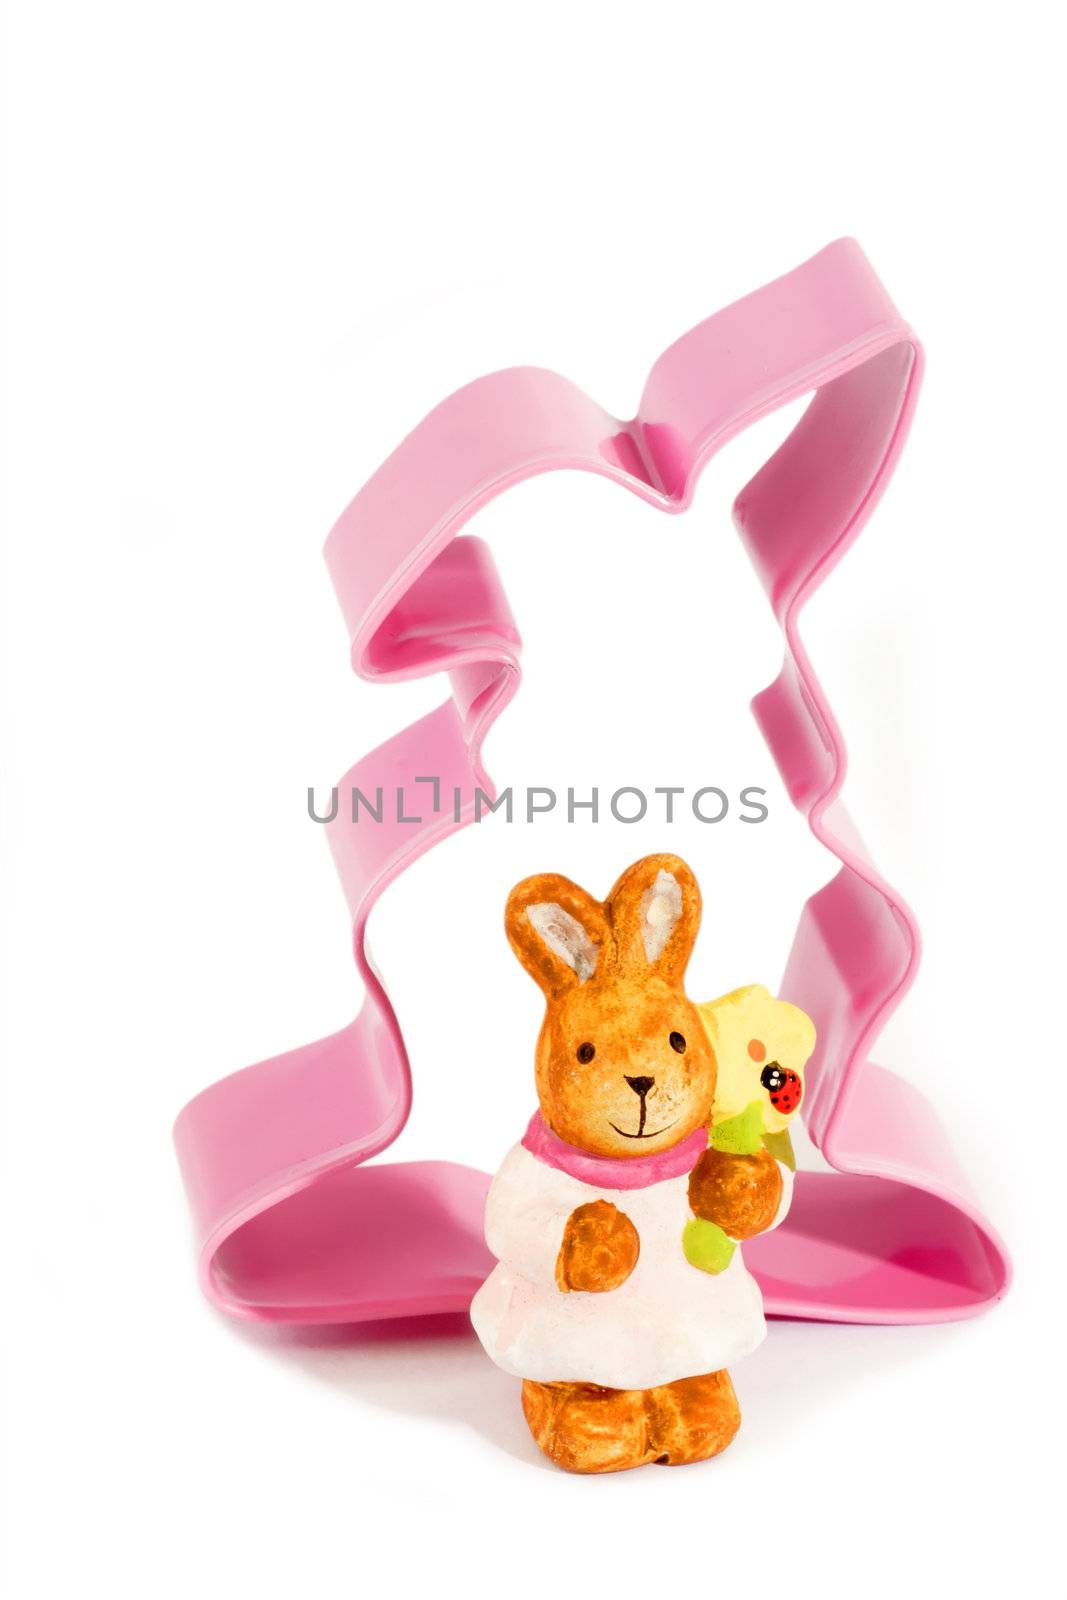 Pink easter bisquit cutter on bright background